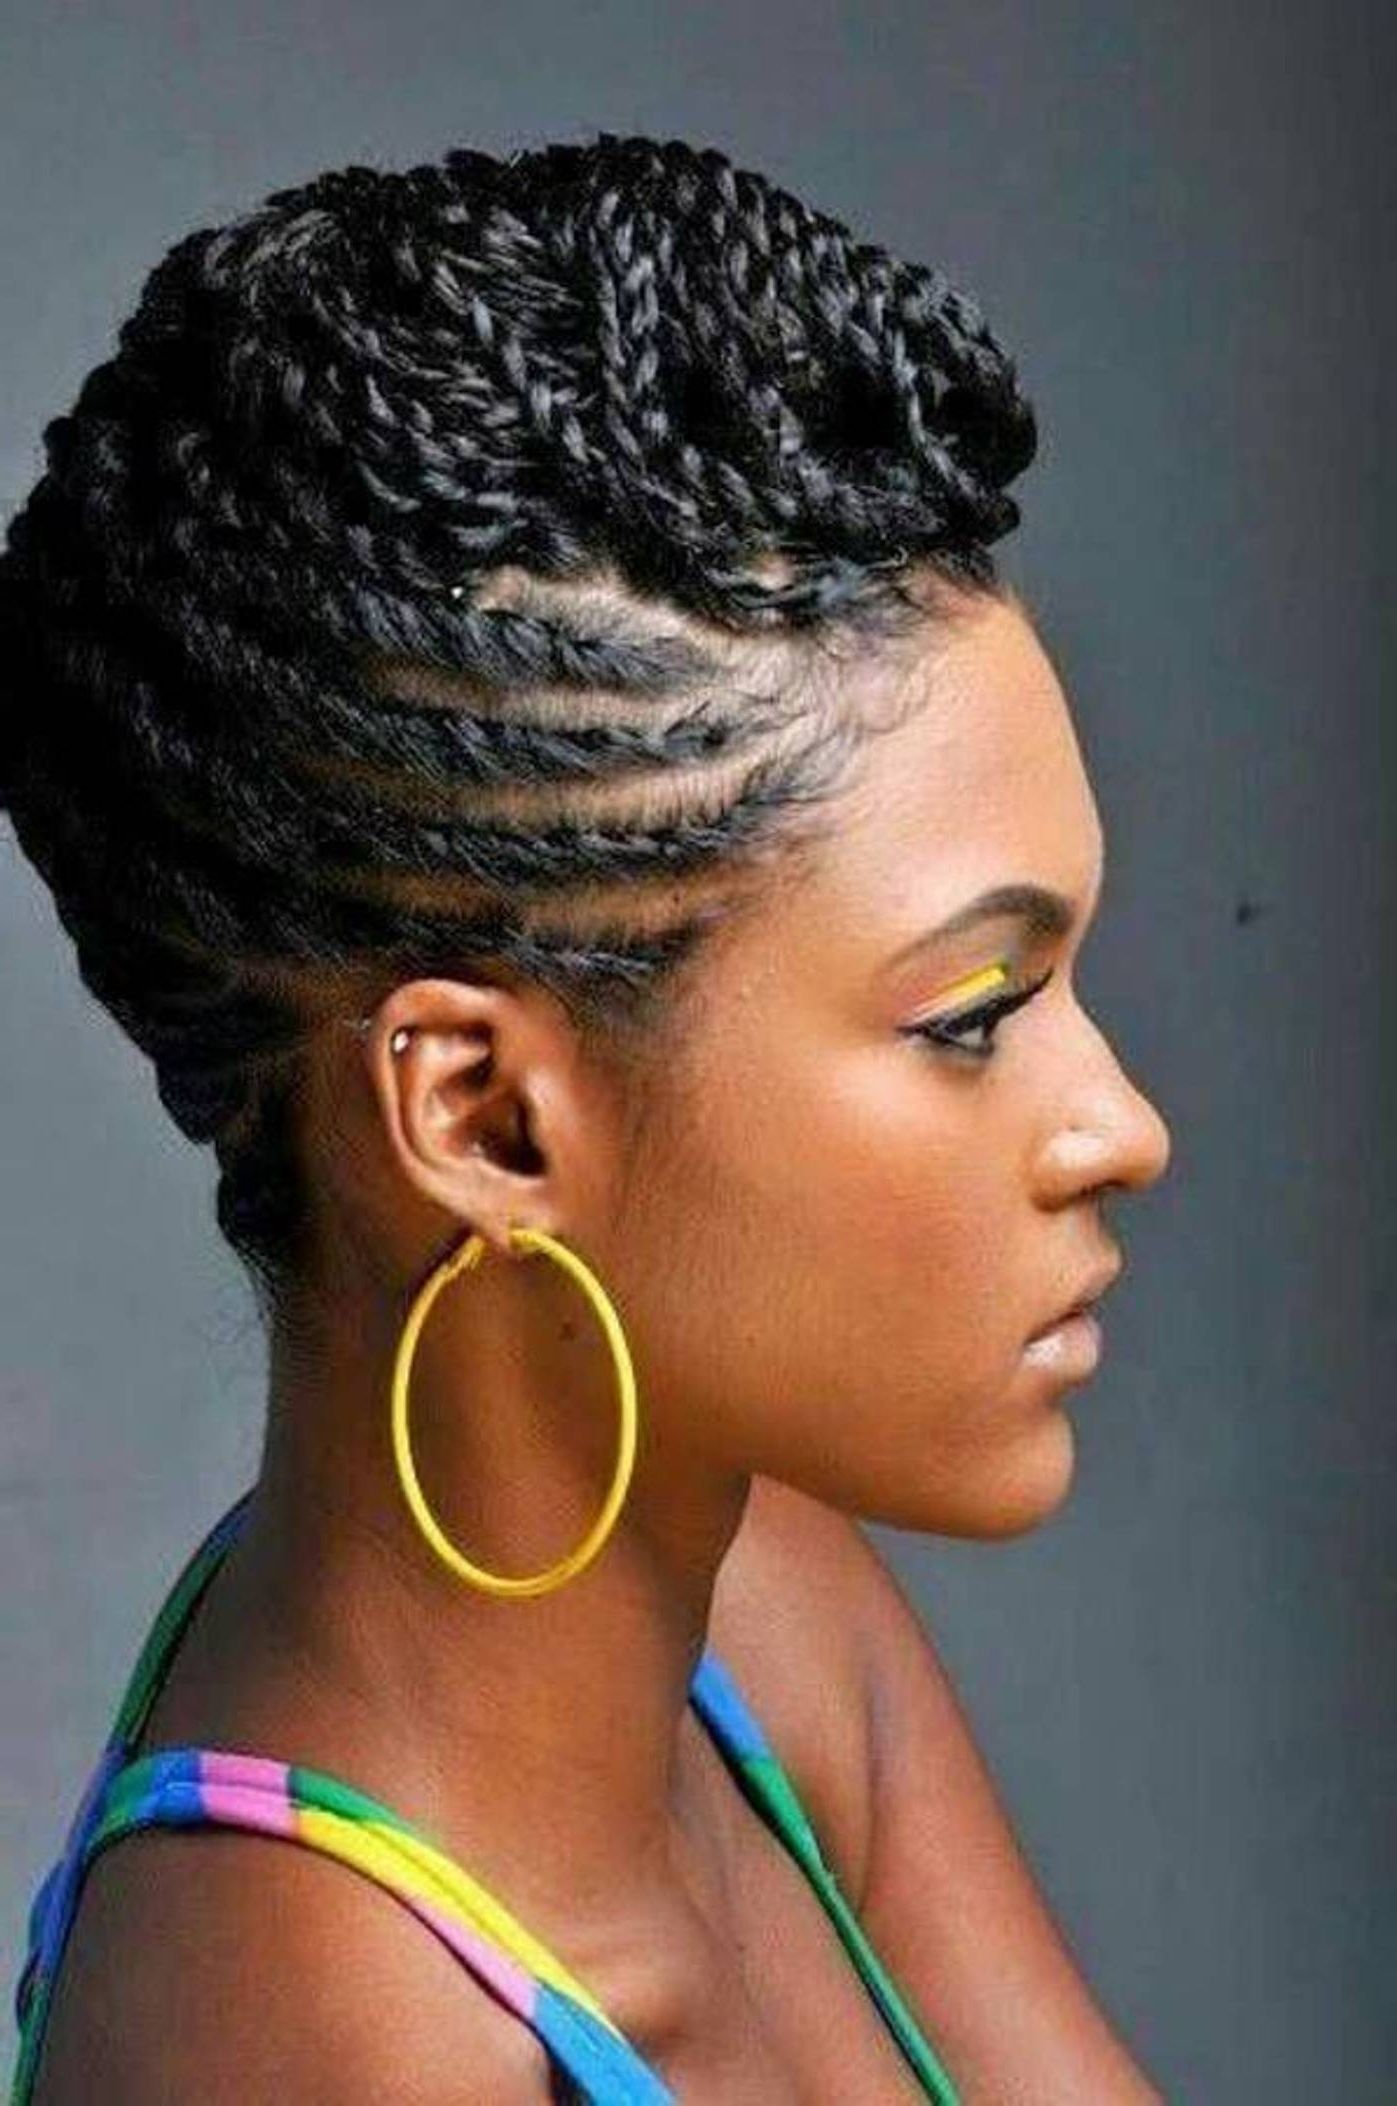 25 Updo Hairstyles For Black Women In Well Known Updo Black Braided Hairstyles (View 1 of 15)